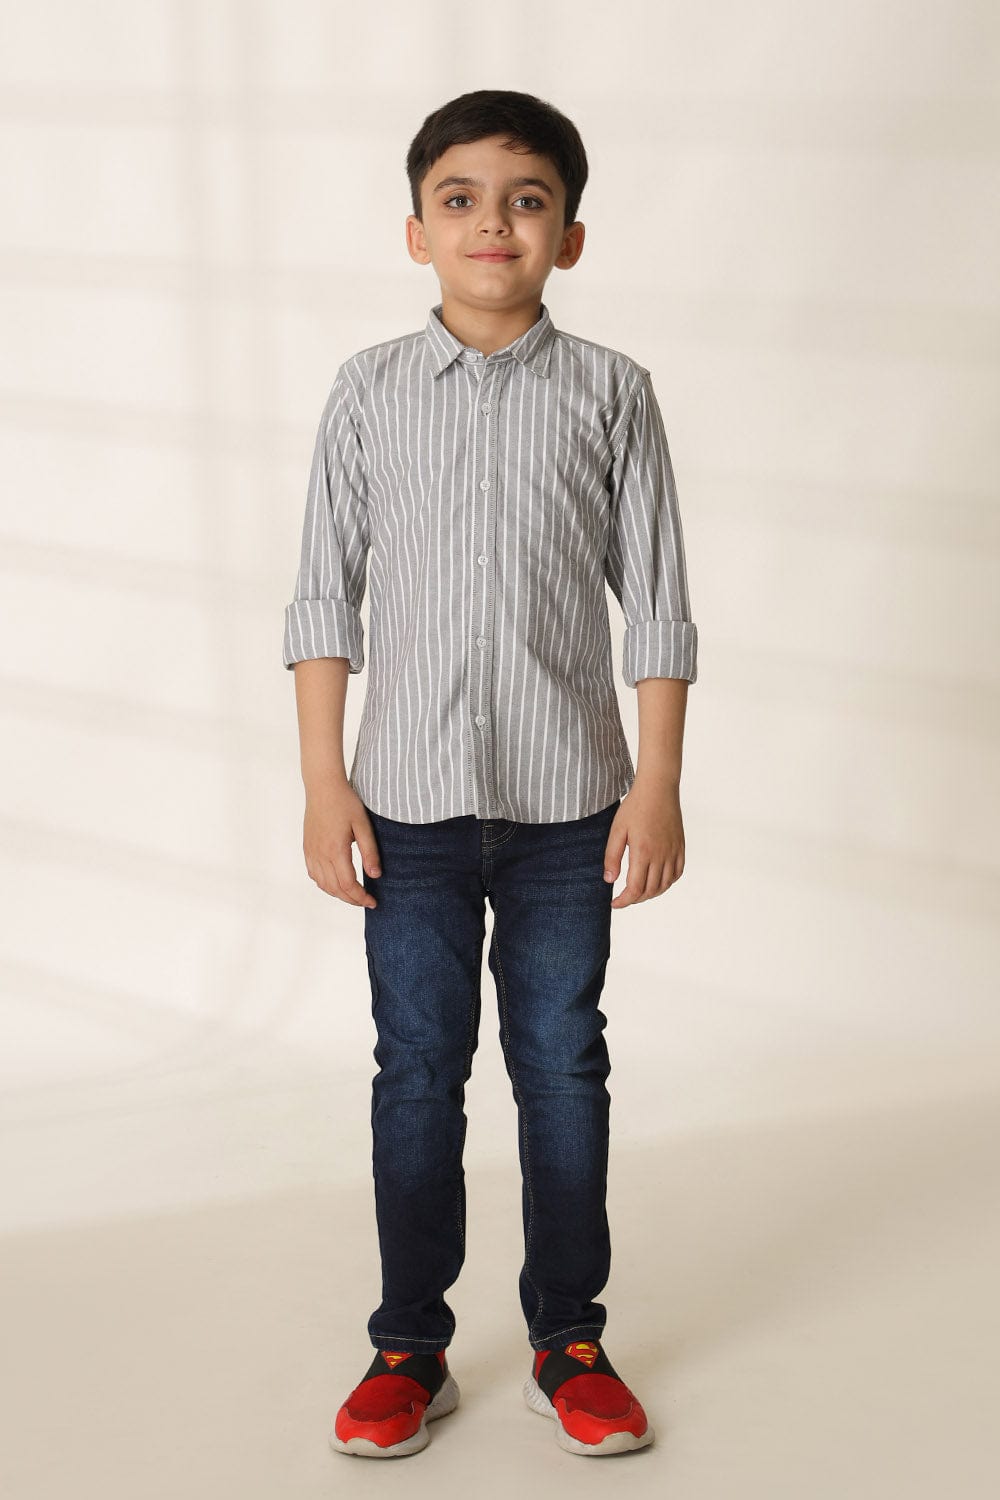 Hope Not Out by Shahid Afridi Boys Casual Shirt Grey Vertical Lining Boy's Shirt